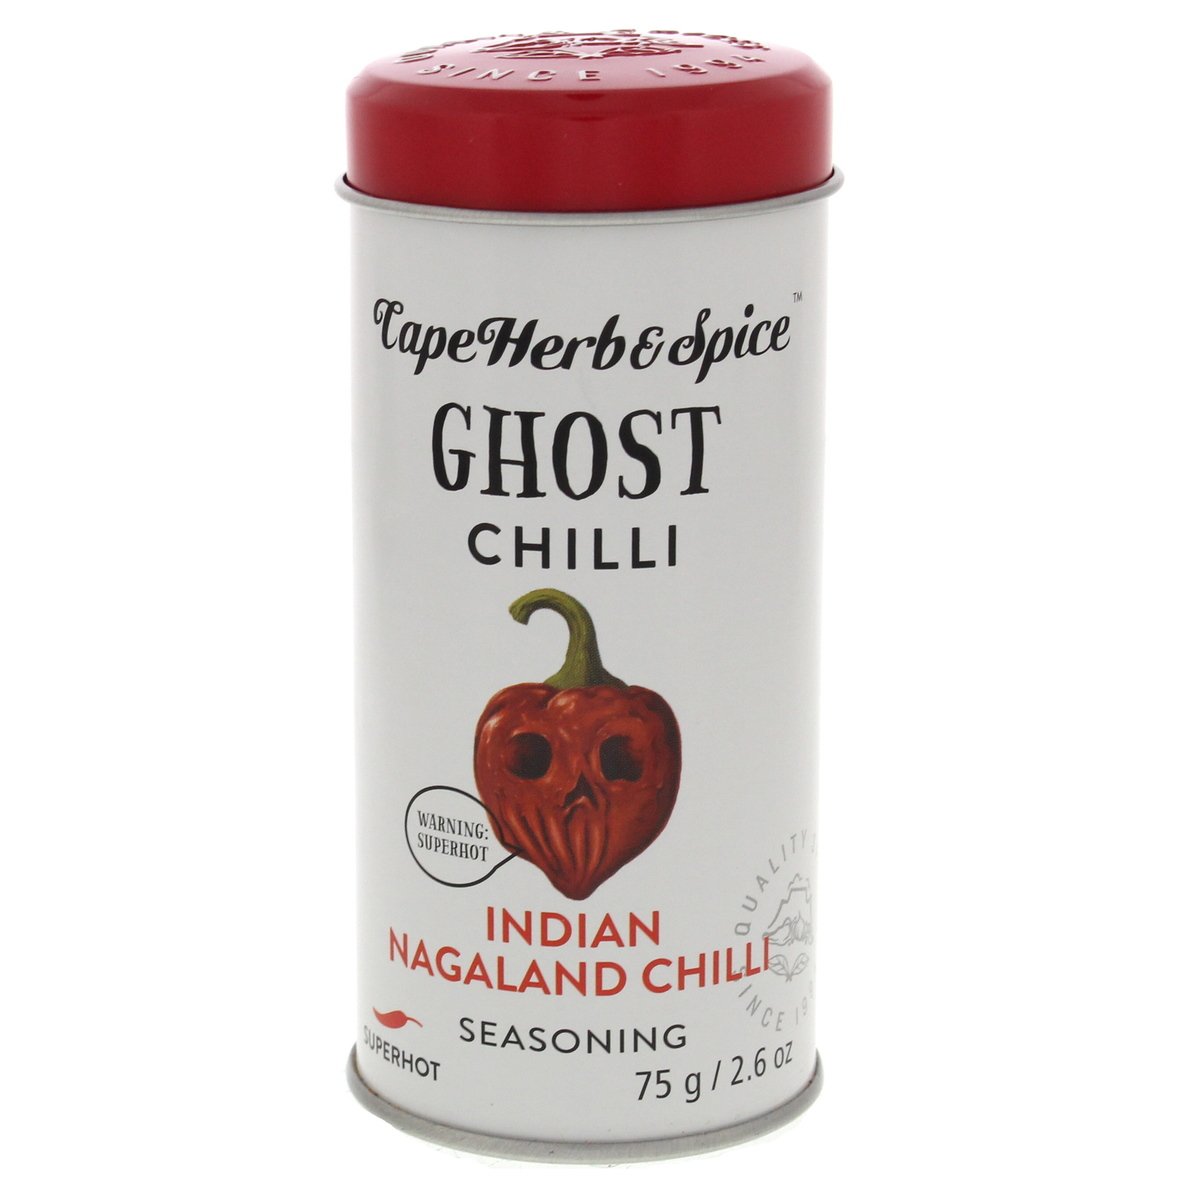 Cape Herb & Spice Ghost Chilli Indian Nagaland Chilli Seasoning 75g